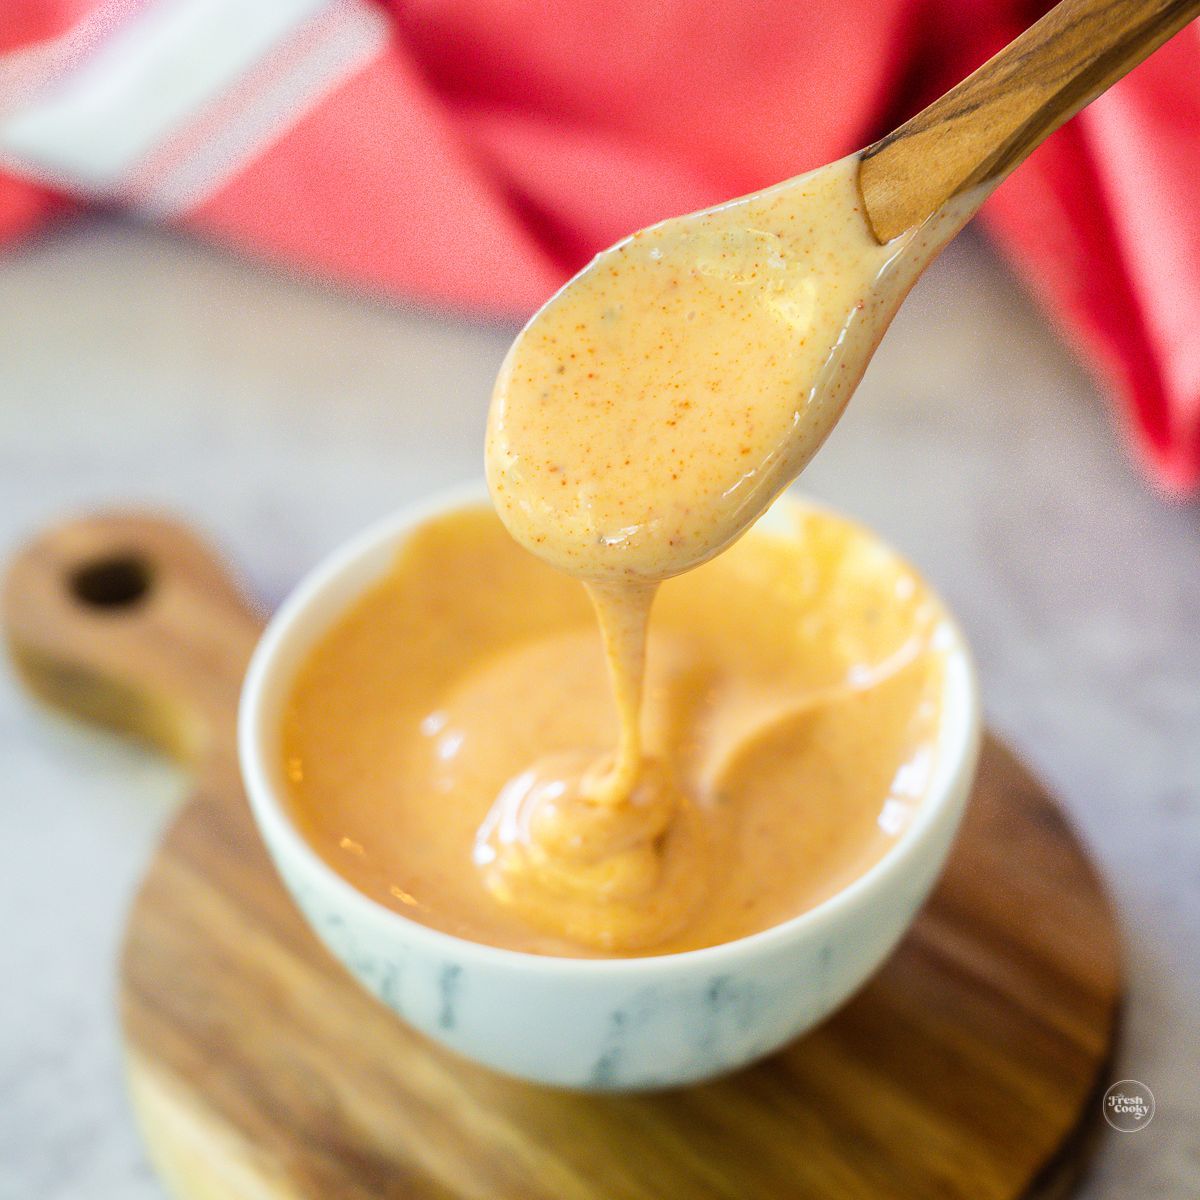 Looking to spice up your meals? Try out this delicious yum yum sauce recipe that will take your taste buds on a flavor ride! #dippingsauce #yumyumsauce thefreshcooky.com/hibachi-sauce-…